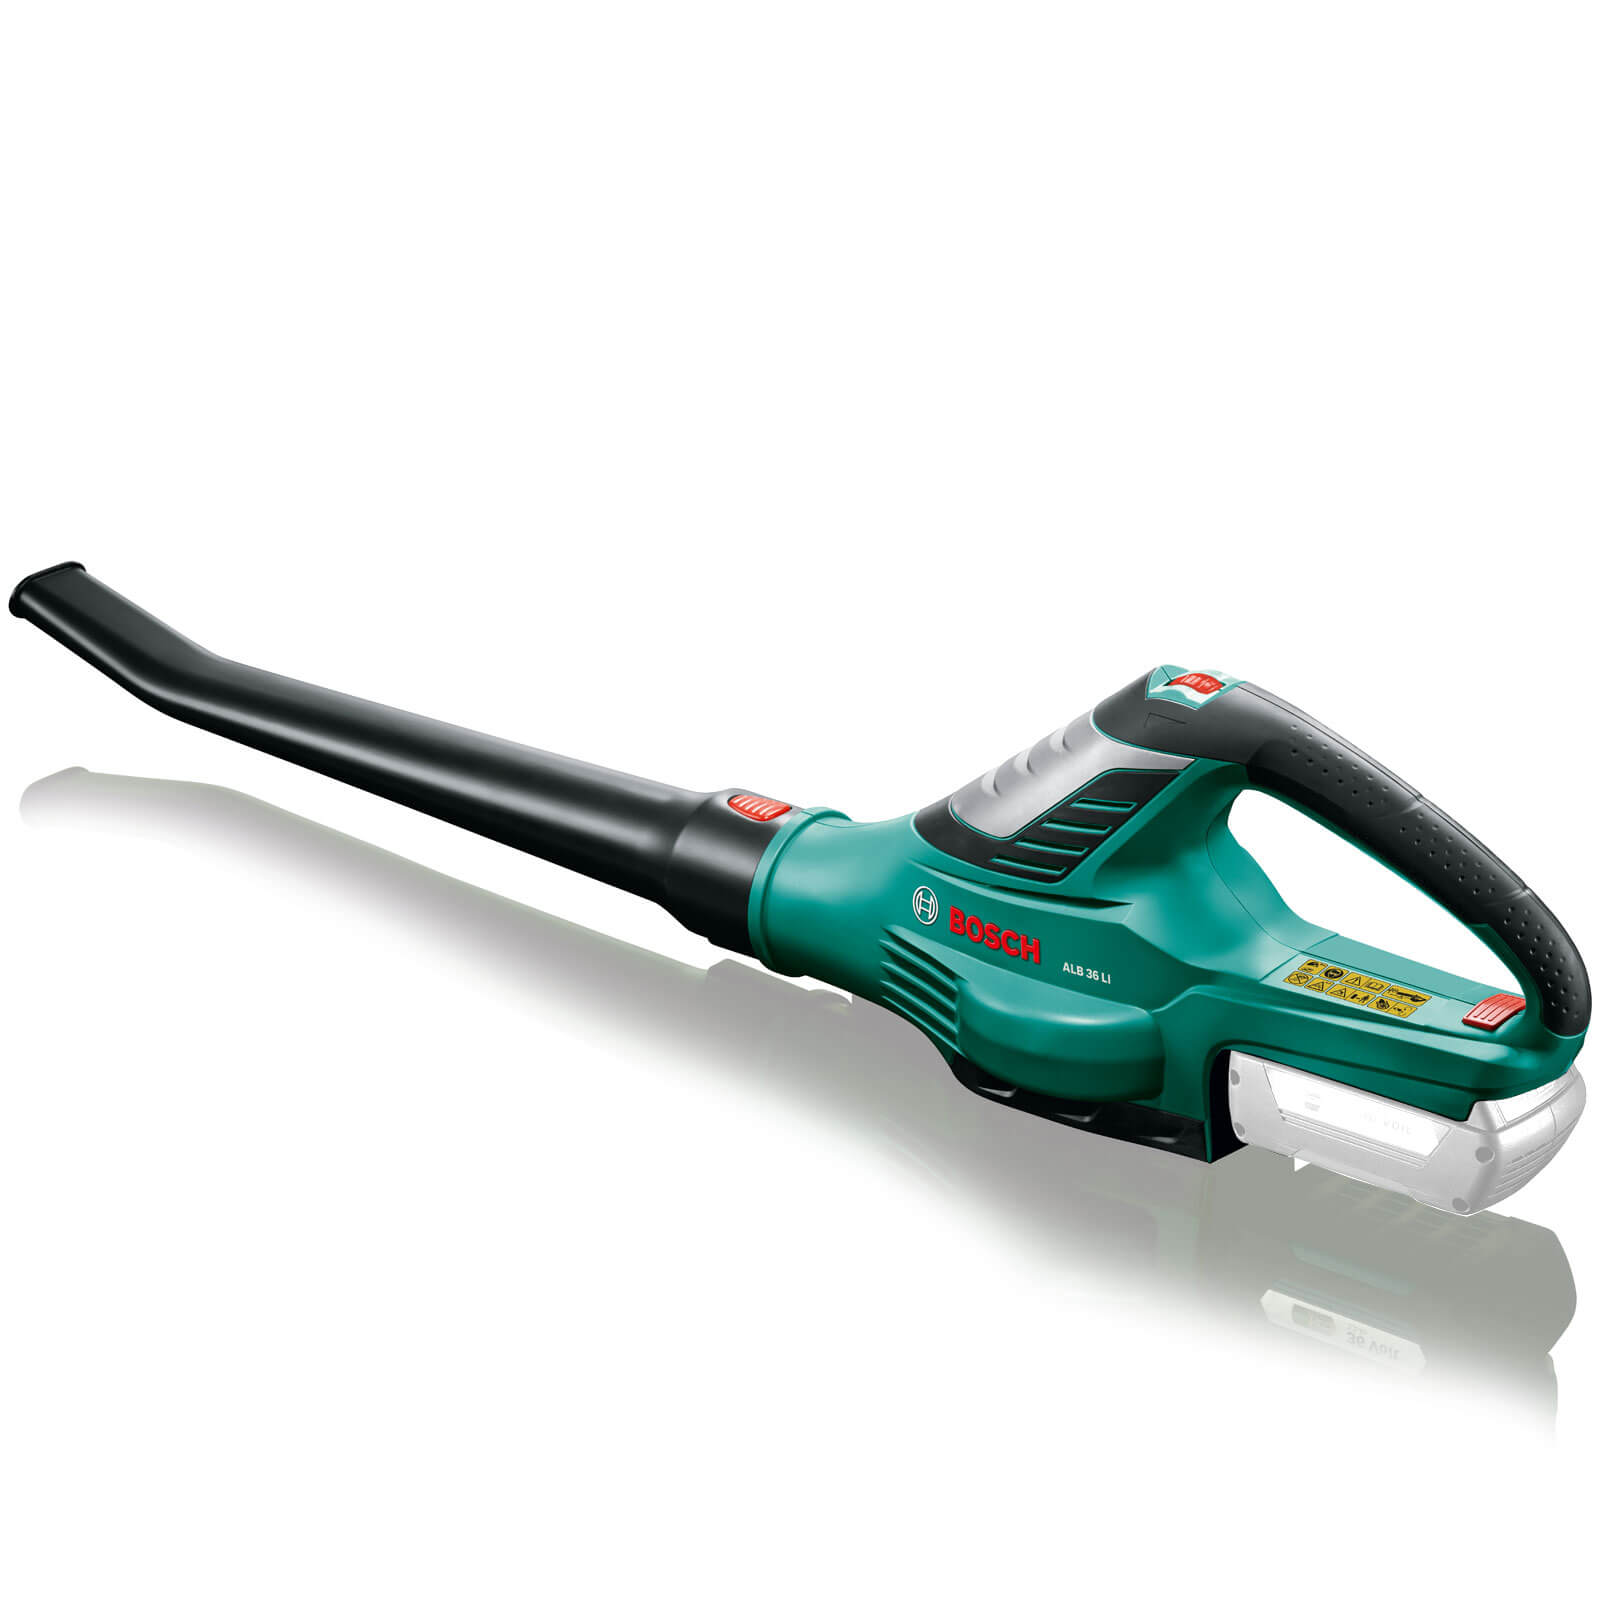 Bosch ALB 36 LI 36v Cordless Garden Blower without Battery or Charger